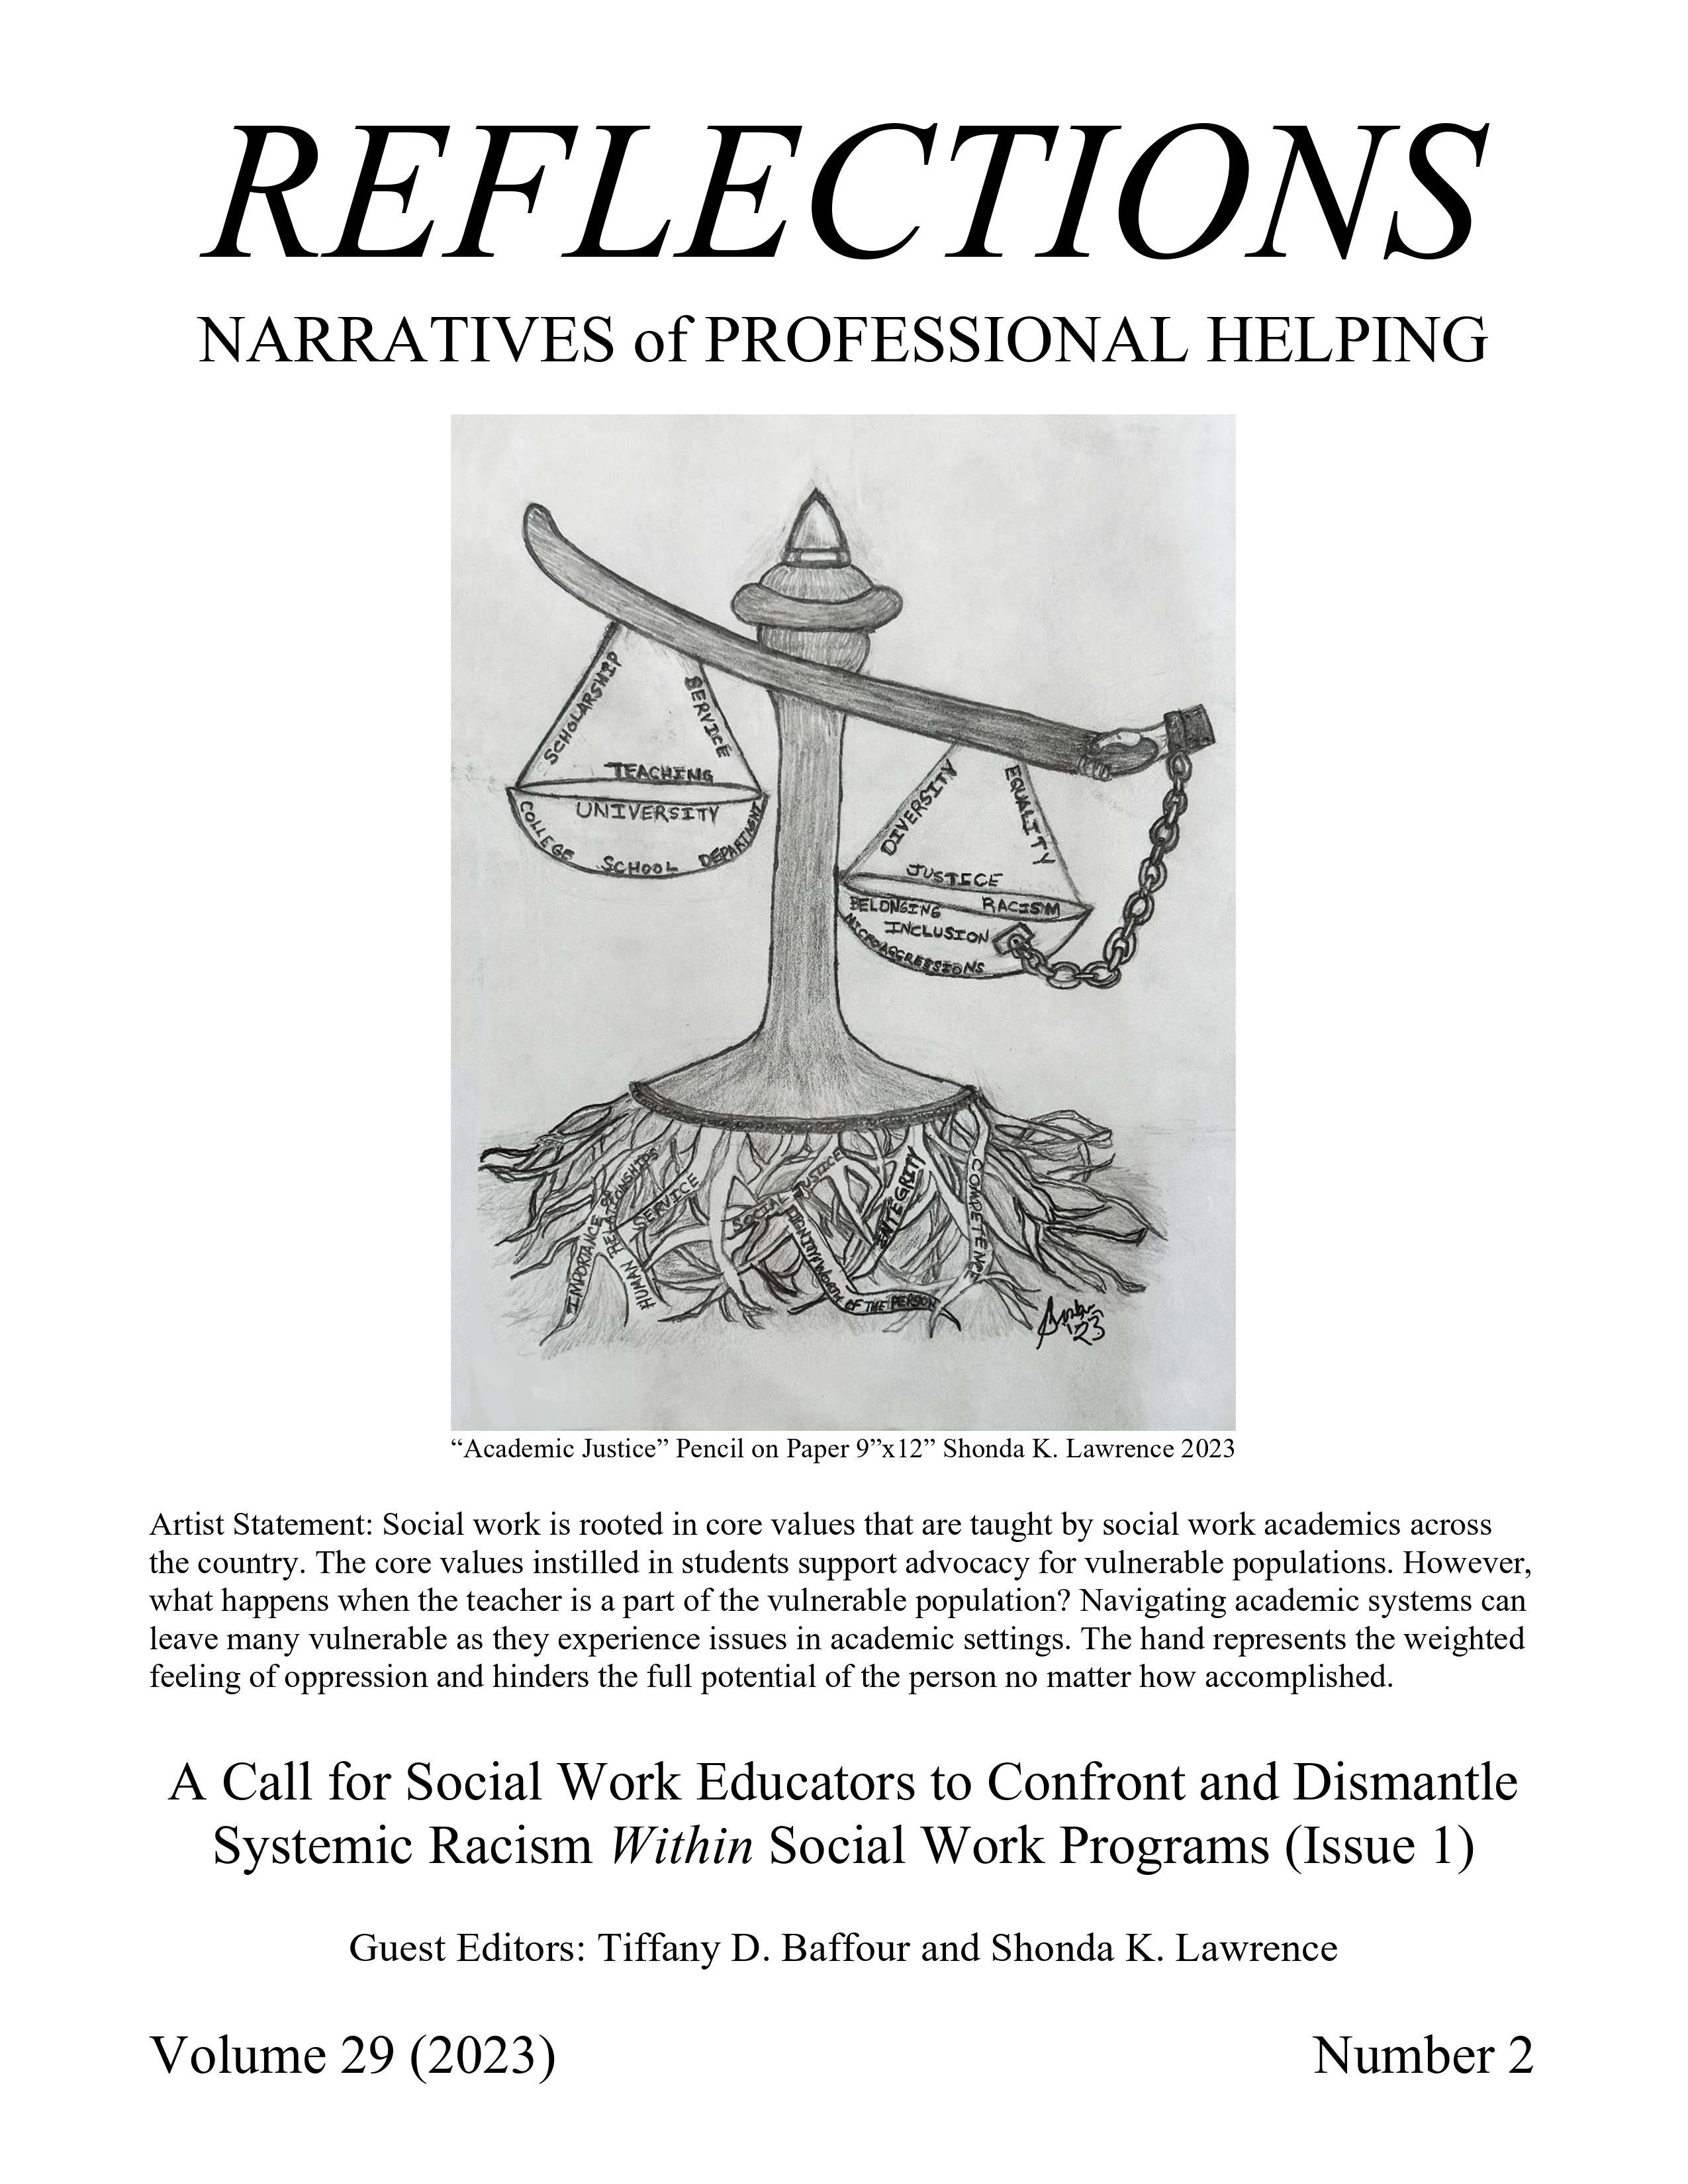 					View Vol. 29 No. 2 (2023): A Call for Social Work Educators to Confront and Dismantle Systemic Racism WITHIN Social Work Programs (Issue 1)
				